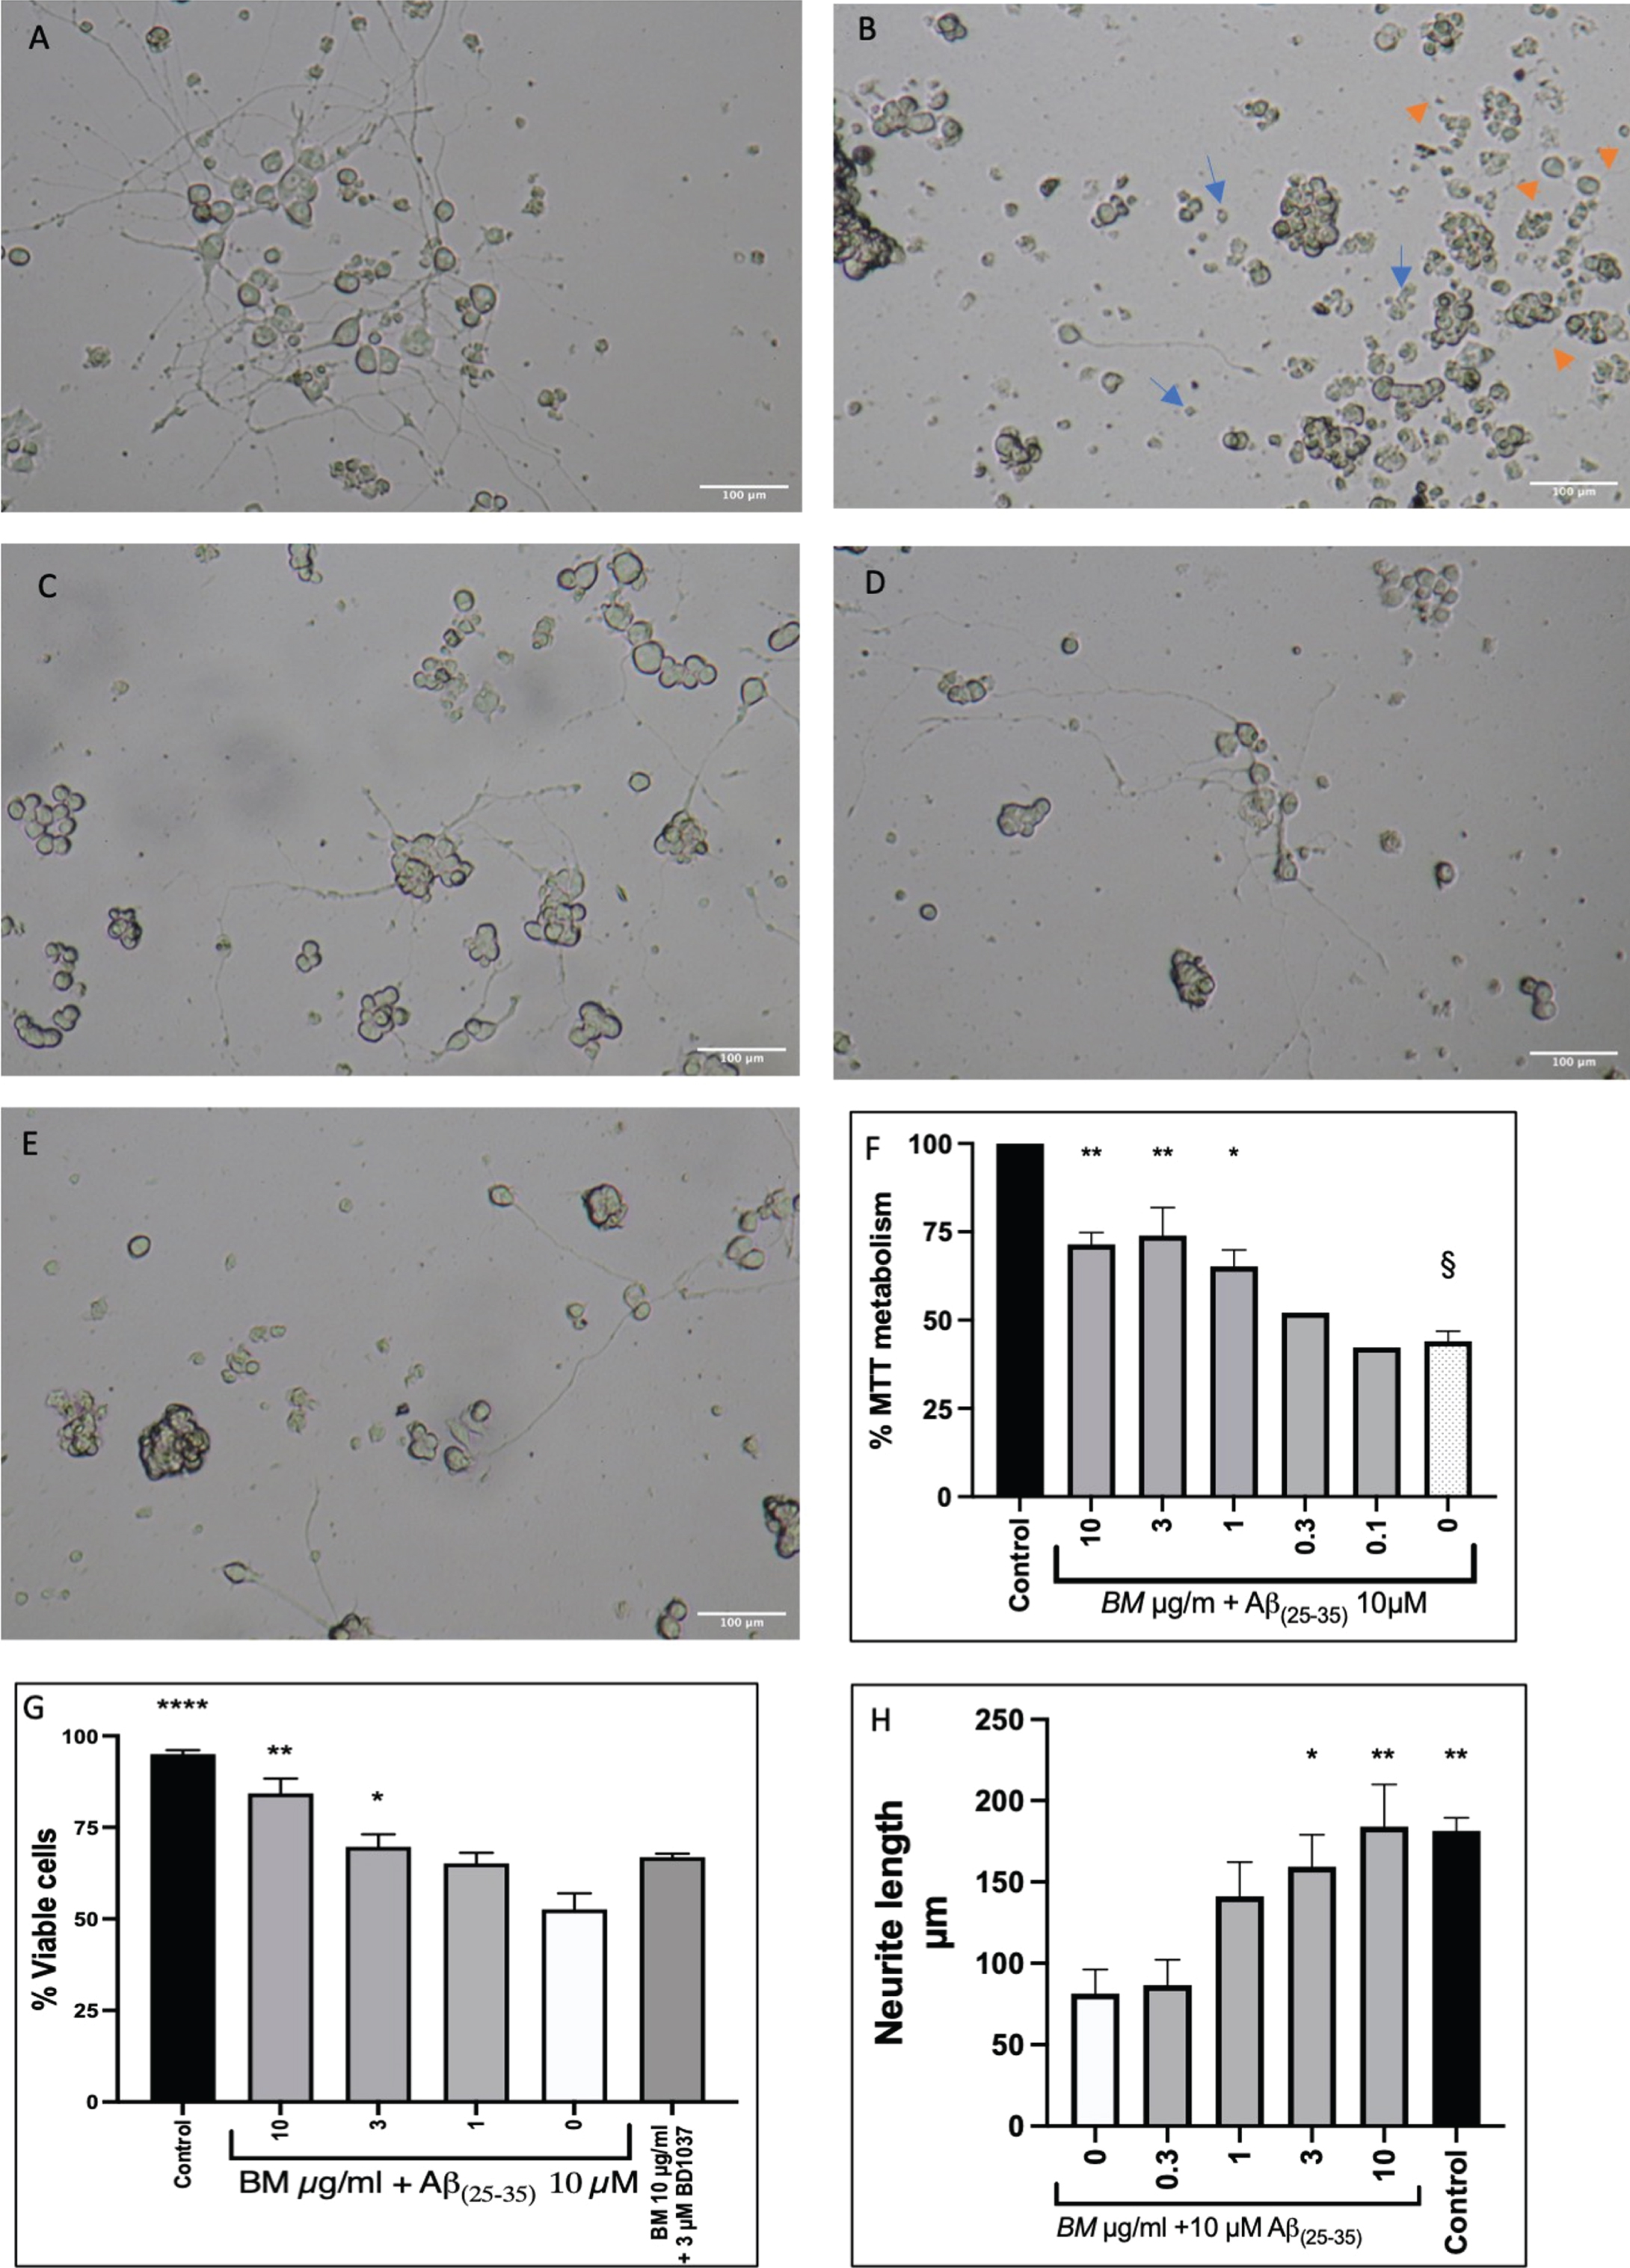 Protective effect of BM in Aβ(25-35) treated PC-12 cells. A Control cells (NGF 50 ng/ml difficilitated PC-12 cells). B Differentiated PC-12 cells treated with Aβ(25-35)10 μM. The image shows shrunken cells (Blue arrows) and damaged neurites (orange arrows). C Differentiated PC-12 cells treated with Aβ(25-35)10 μM and BM 3 μg/ml. D Differentiated PC-12 cells treated with Aβ(25-35) 10 μM and BM 1 μg/ml. E Differentiated PC-12 cells treated with Aβ(25-35) 10 μM and BM 0.3 μg/ml. F BM dose-dependently improved cell survival in PC-12 cells treated with 10 μM Aβ(25-35). G Cell viability quantified by Trypan blue exclusion assay. H Quantification of neurite damage by Aβ(25-35). Means±SEM from 3 independent experiments; * statistical significance compared to 10 μM Aβ(25-35) treated cells ANOVA followed by Dunnett’s post hoc test p < 0.05, **p < 0.01, ****p < 0.0011; §statistical significance compared to control cells ANOVA, followed by Dunnett’s post hoc test p < 0.0001.